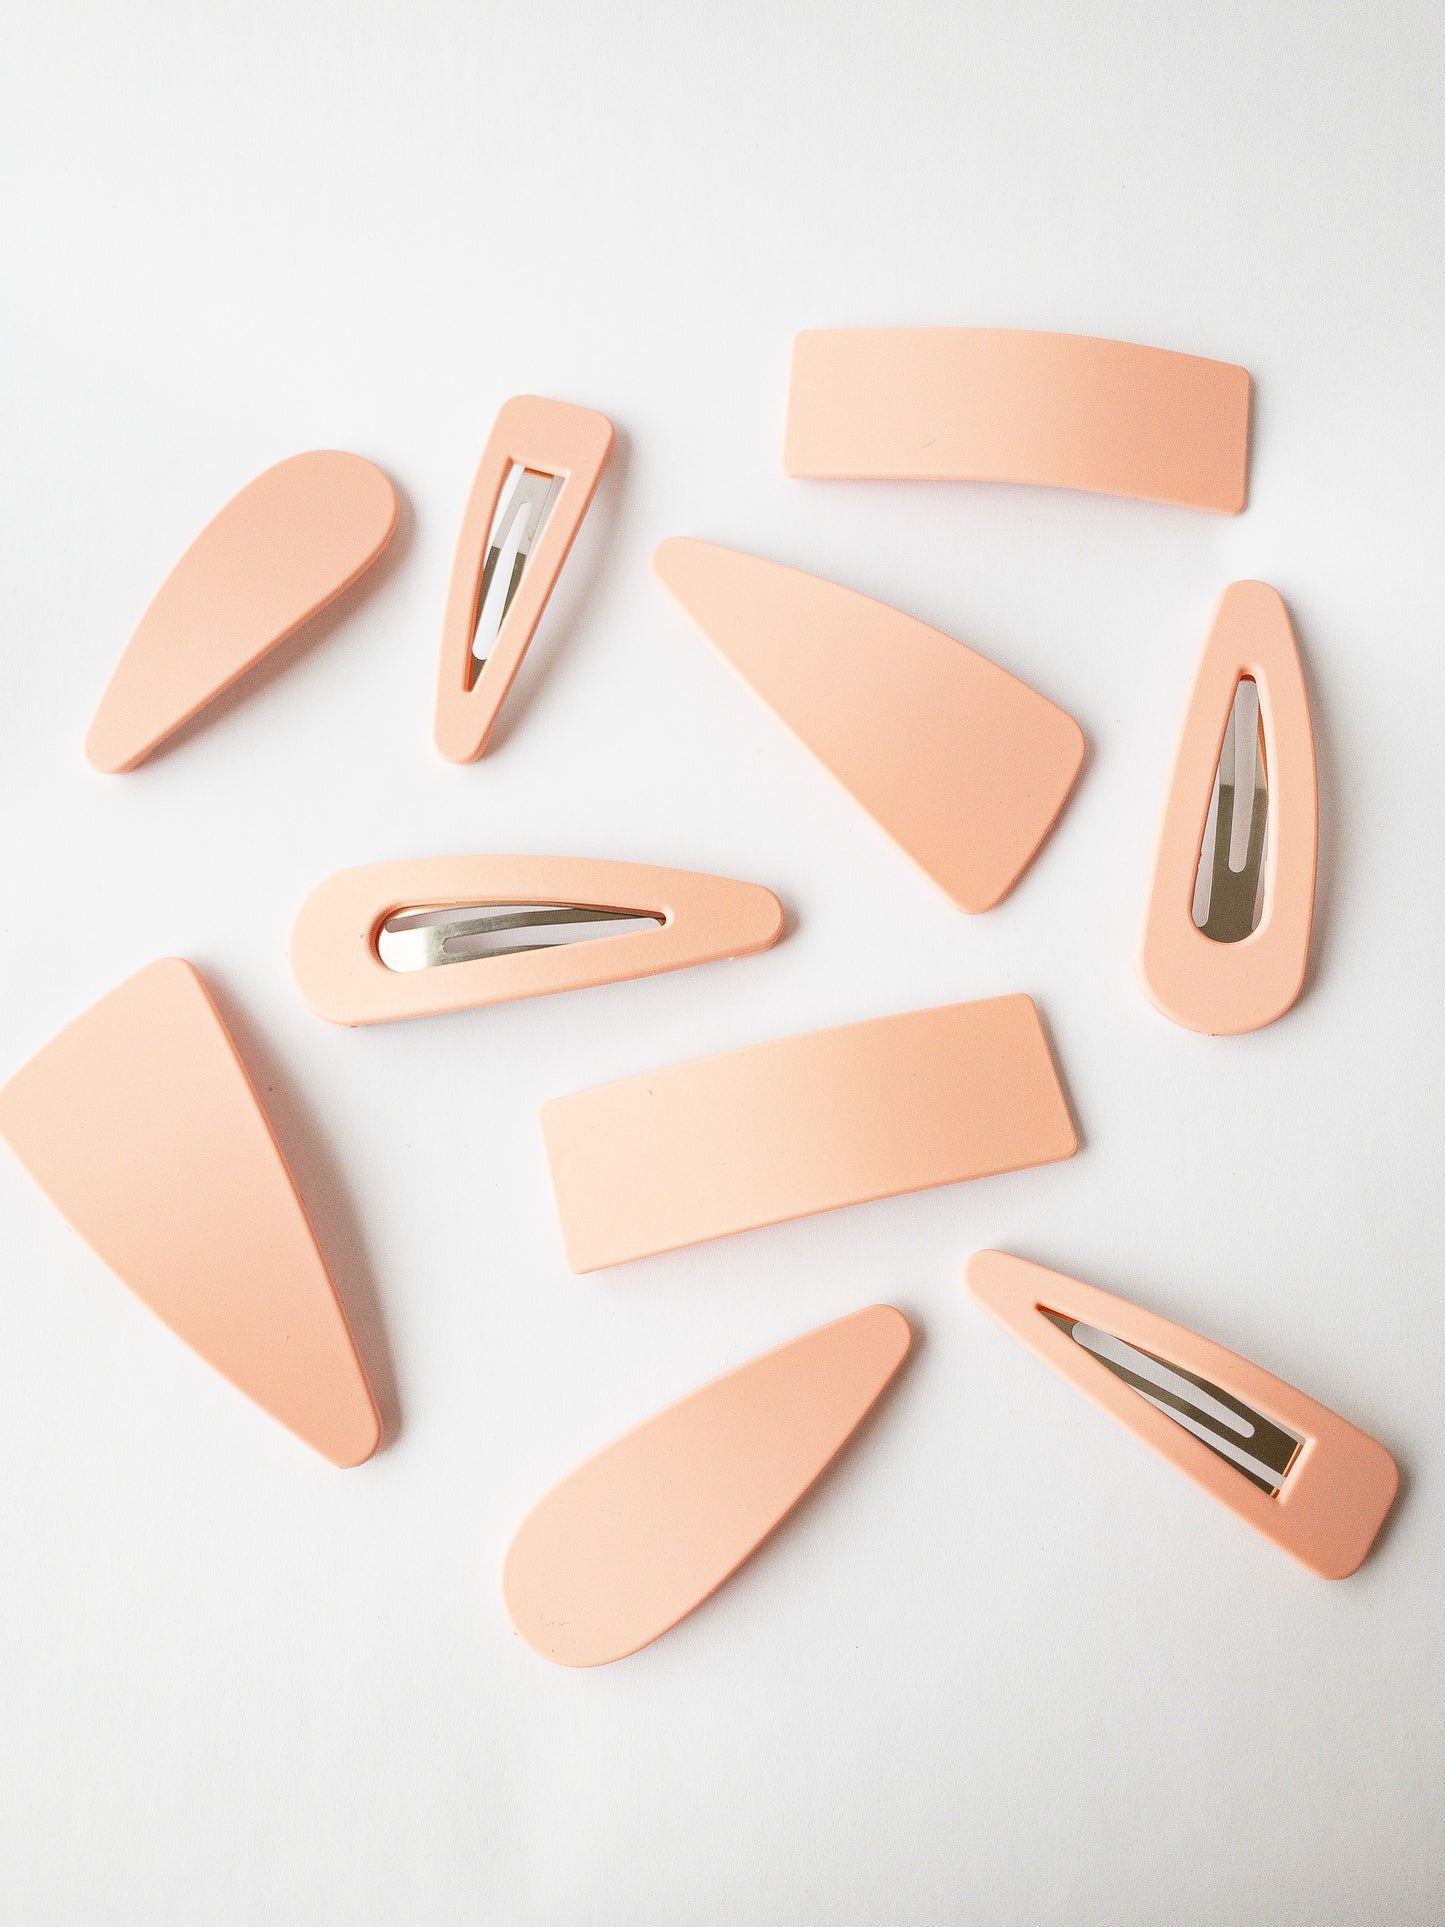 The very best of a classic hair clip! These large snap clip barrettes are your everyday go to and come in a variety of shapes. There are two of each: asymmetrical triangle, triangle outline, solid teardrop, teardrop outline, and solid rectangle. Each set comes in an easy to store box and the matte colors are a must have!